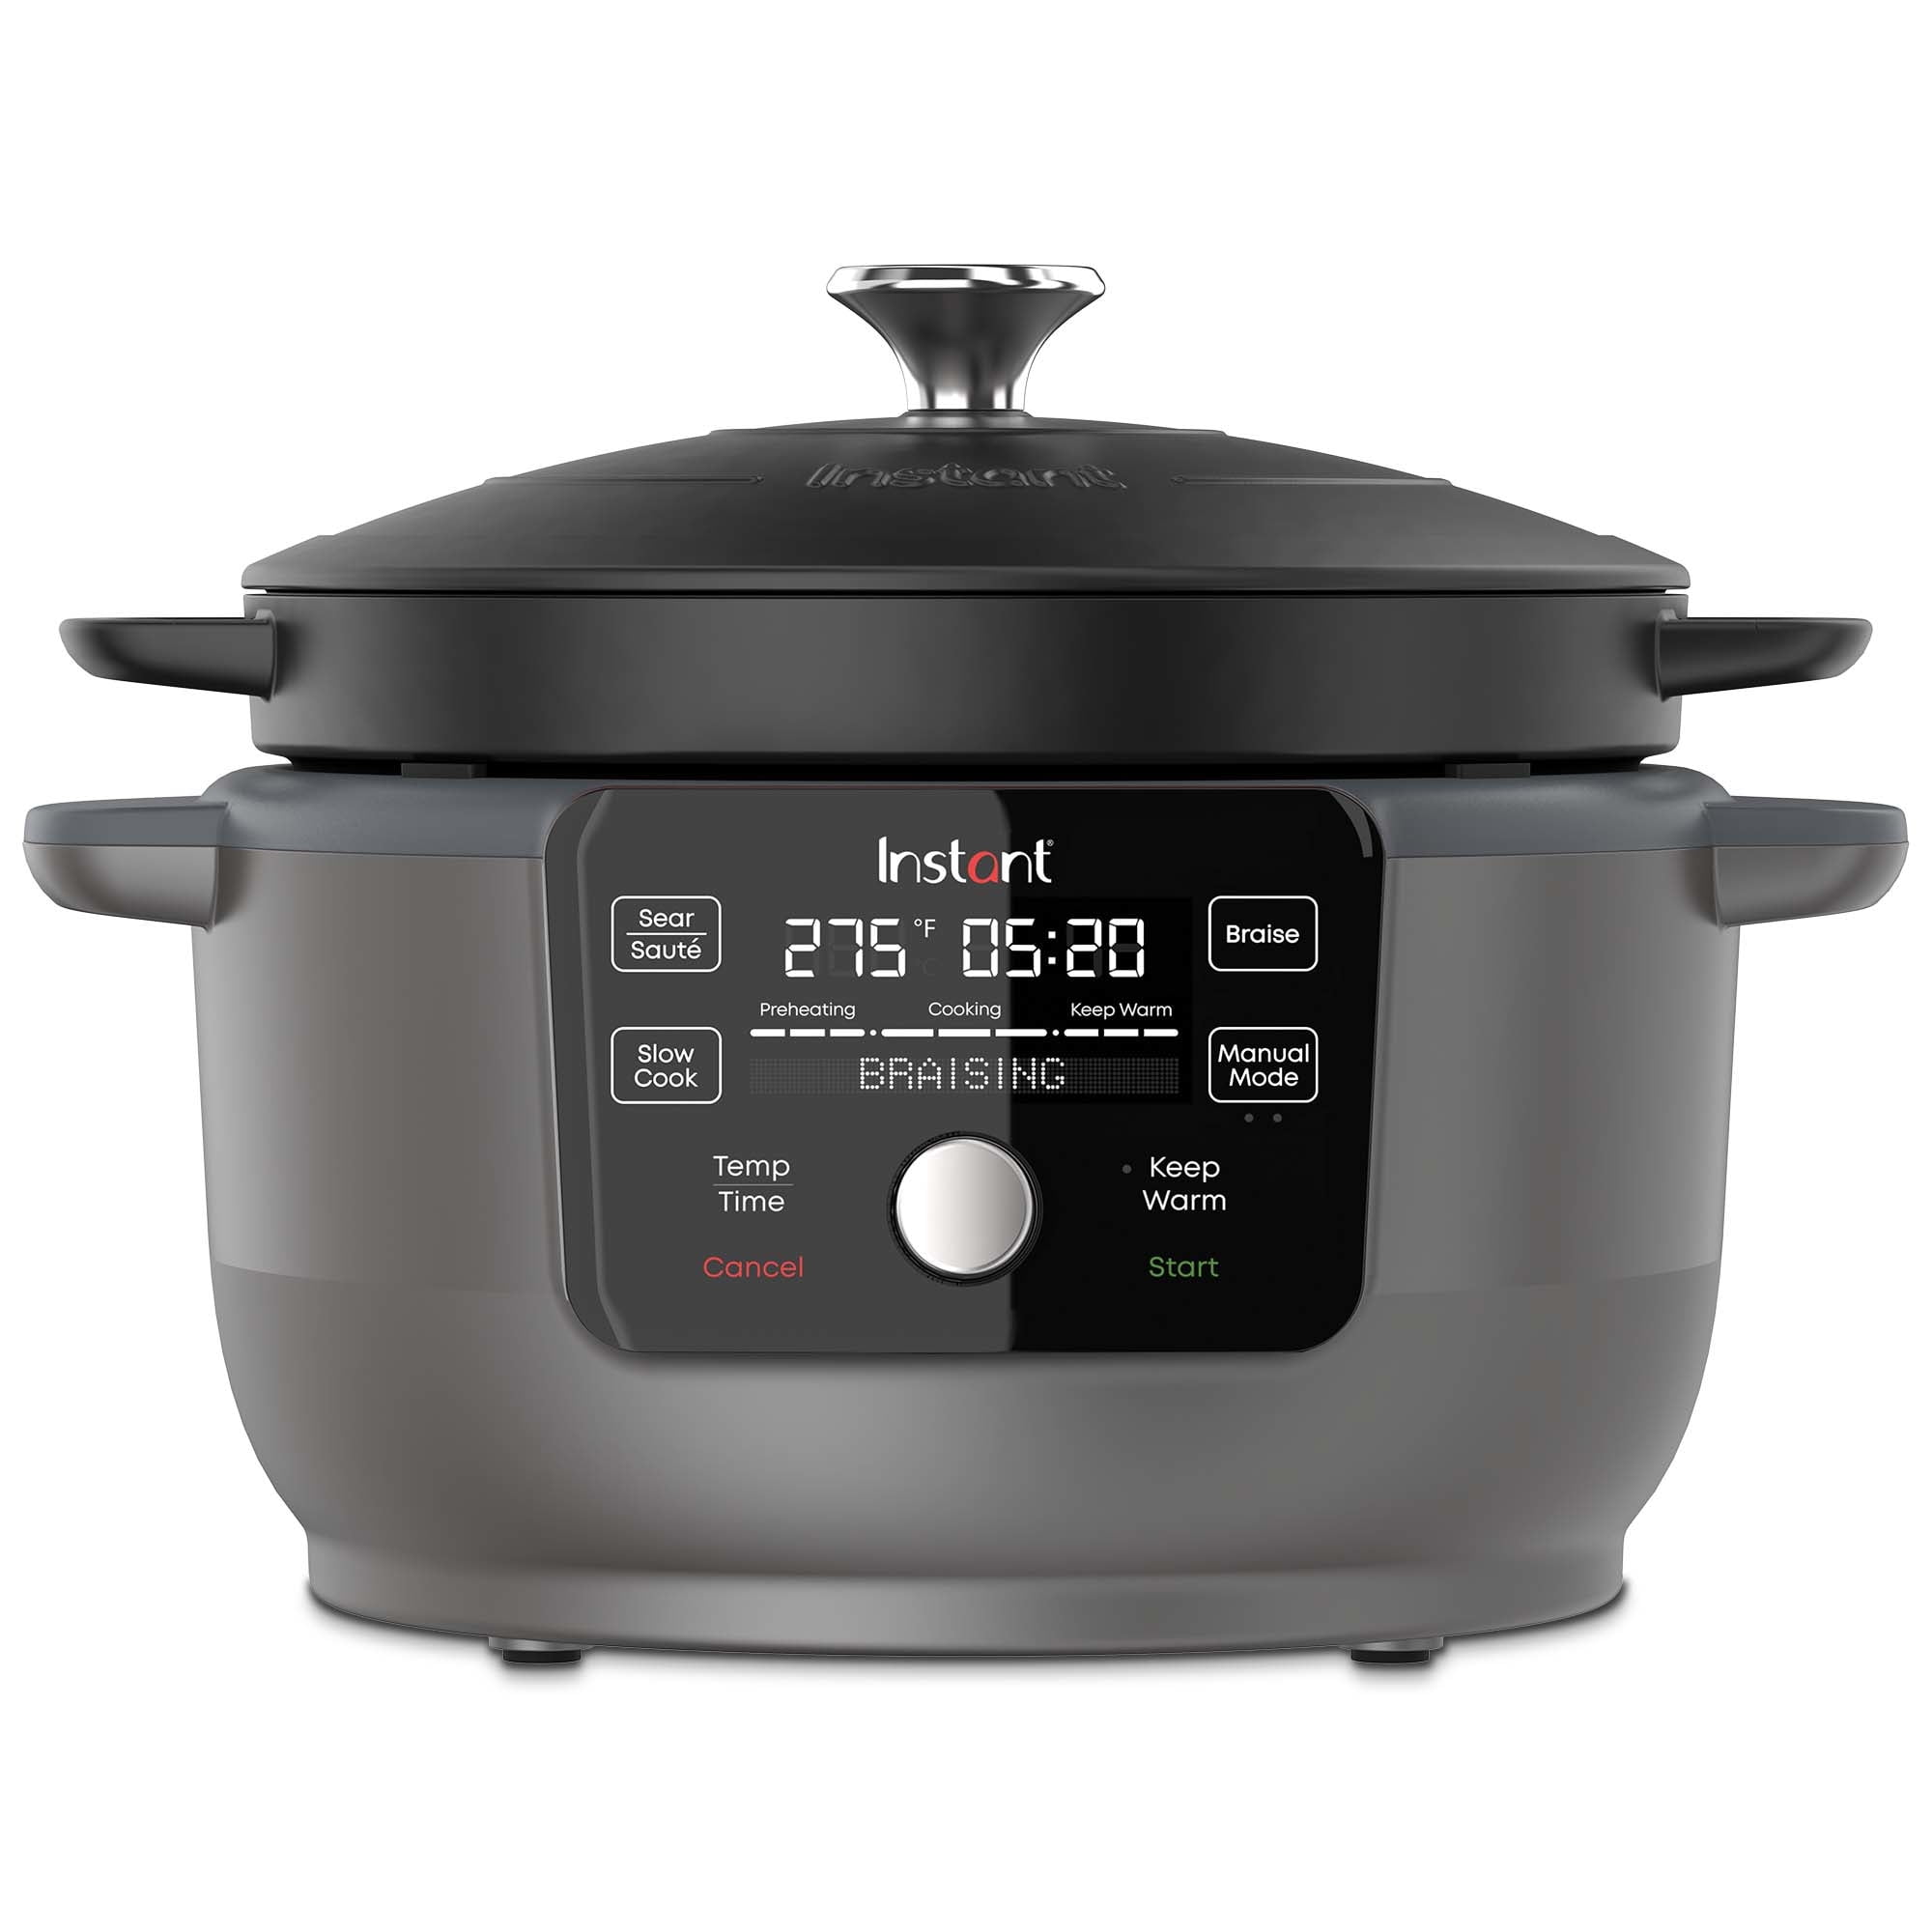 KOOC 10-in-1 Electric Dutch Oven, 6-Quart Blue, Slow Cook, Braise, Meat  Stew, Sear/Sauté, Enameled Cast Iron with Self-Basting Lid, 1500W